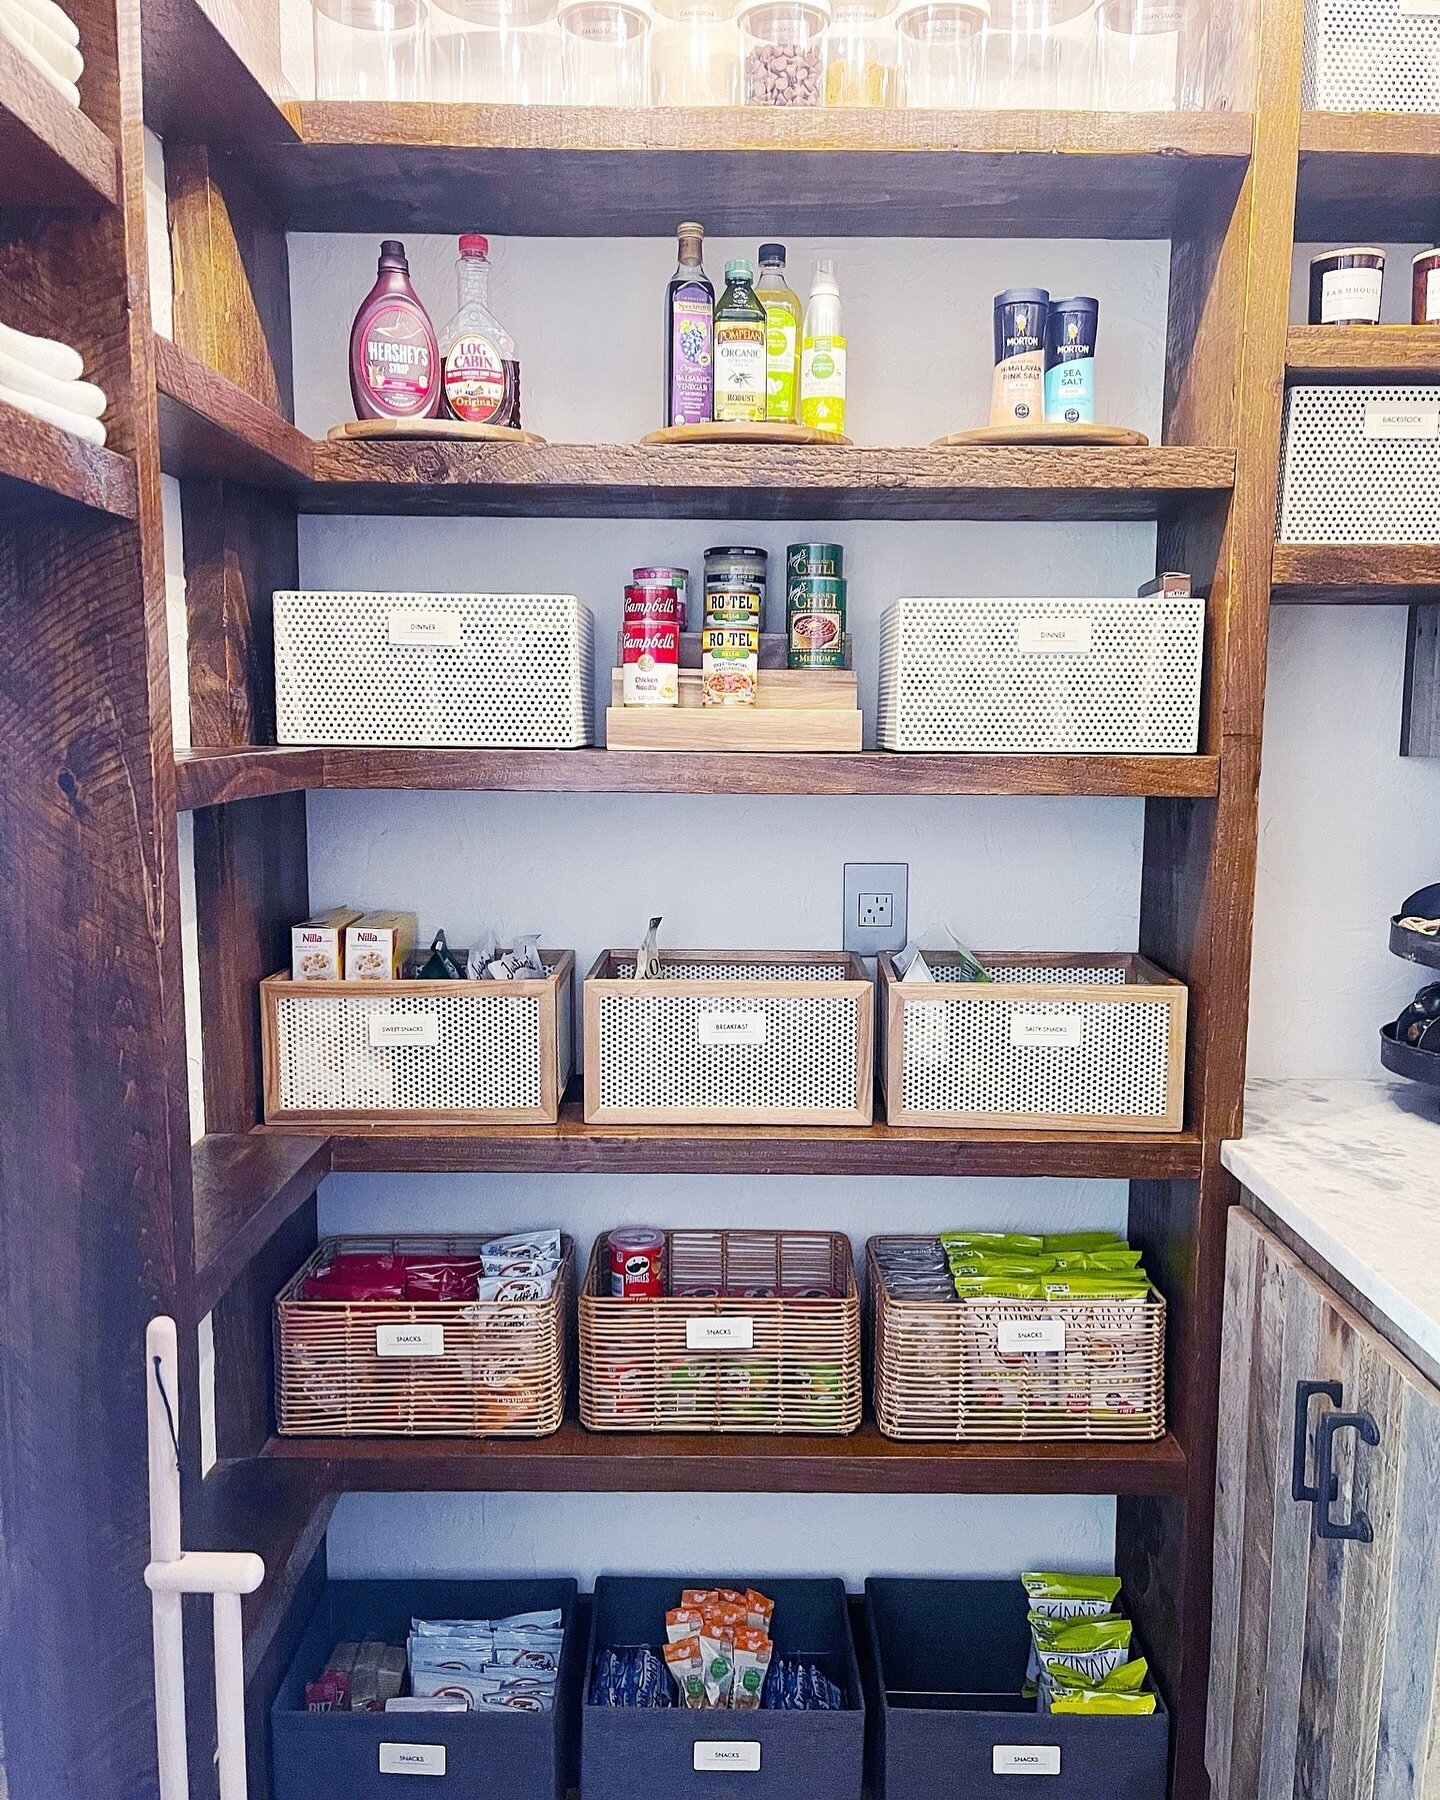 WEEKLY RESET⁣
⁣
Ending Sundays with a fully stocked pantry for the week ahead is part of our weekly reset. Nothing feels better than beginning Mondays on the right foot!⁣
⁣
#organizedsimplicity #home #organization #professionalorganizers #atlanta #or